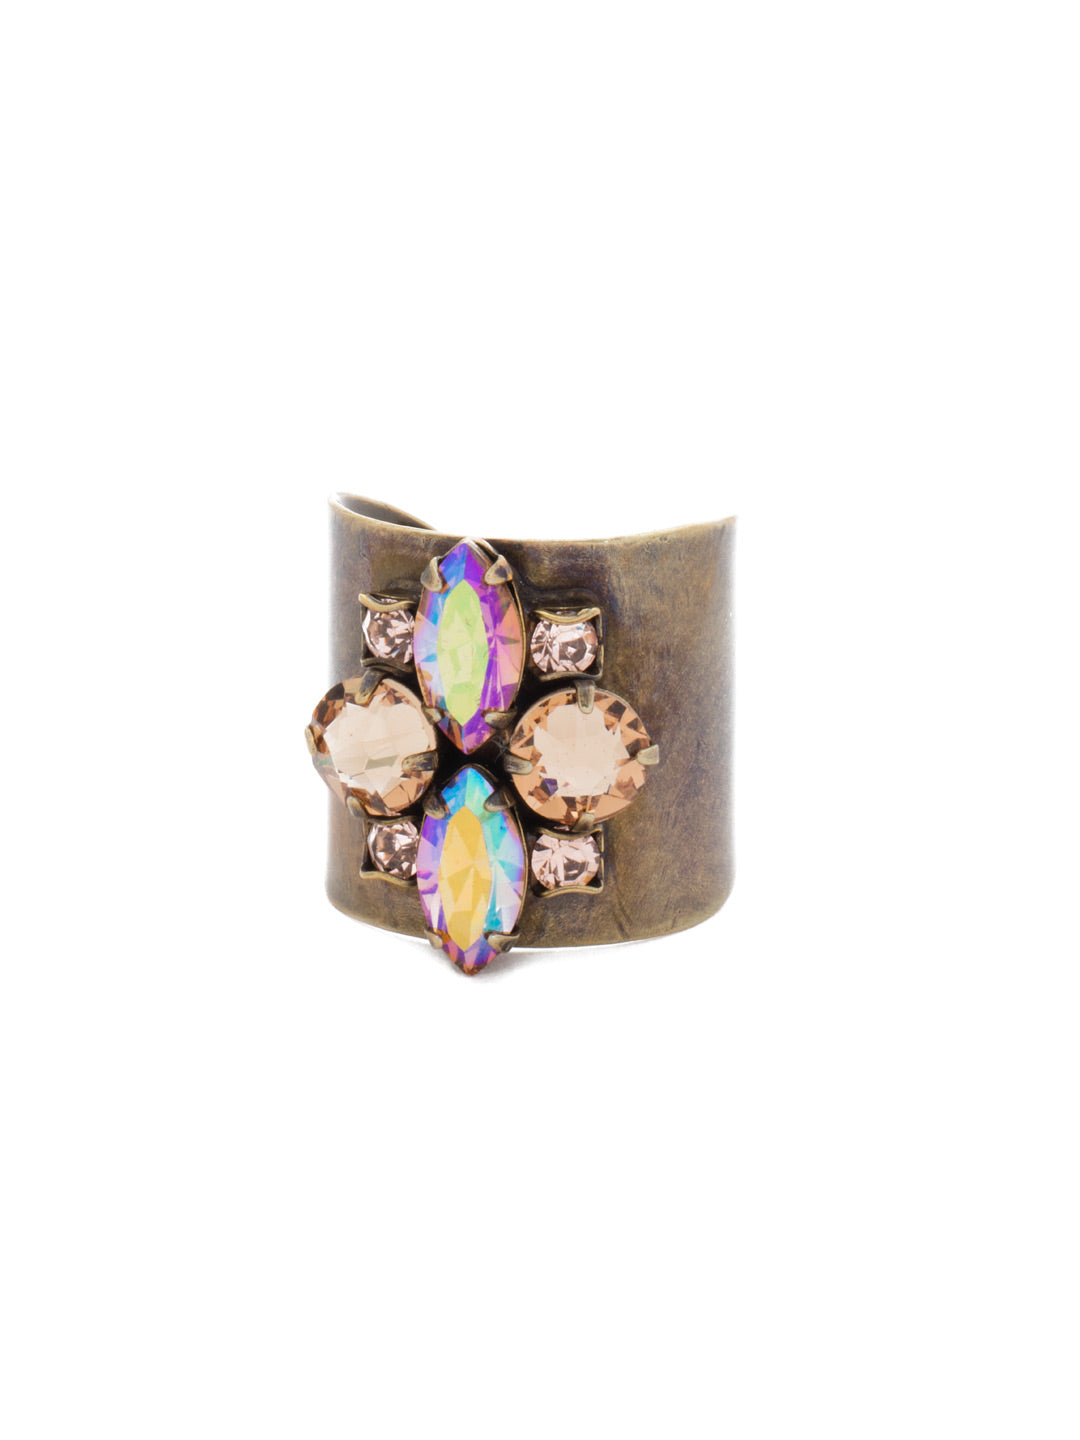 Flower Navette Cuff Ring - RCW49AGNT - Featuring four navette crystals in a floral pattern, this ring will give you that sweet touch of sparkle! From Sorrelli's Neutral Territory collection in our Antique Gold-tone finish.